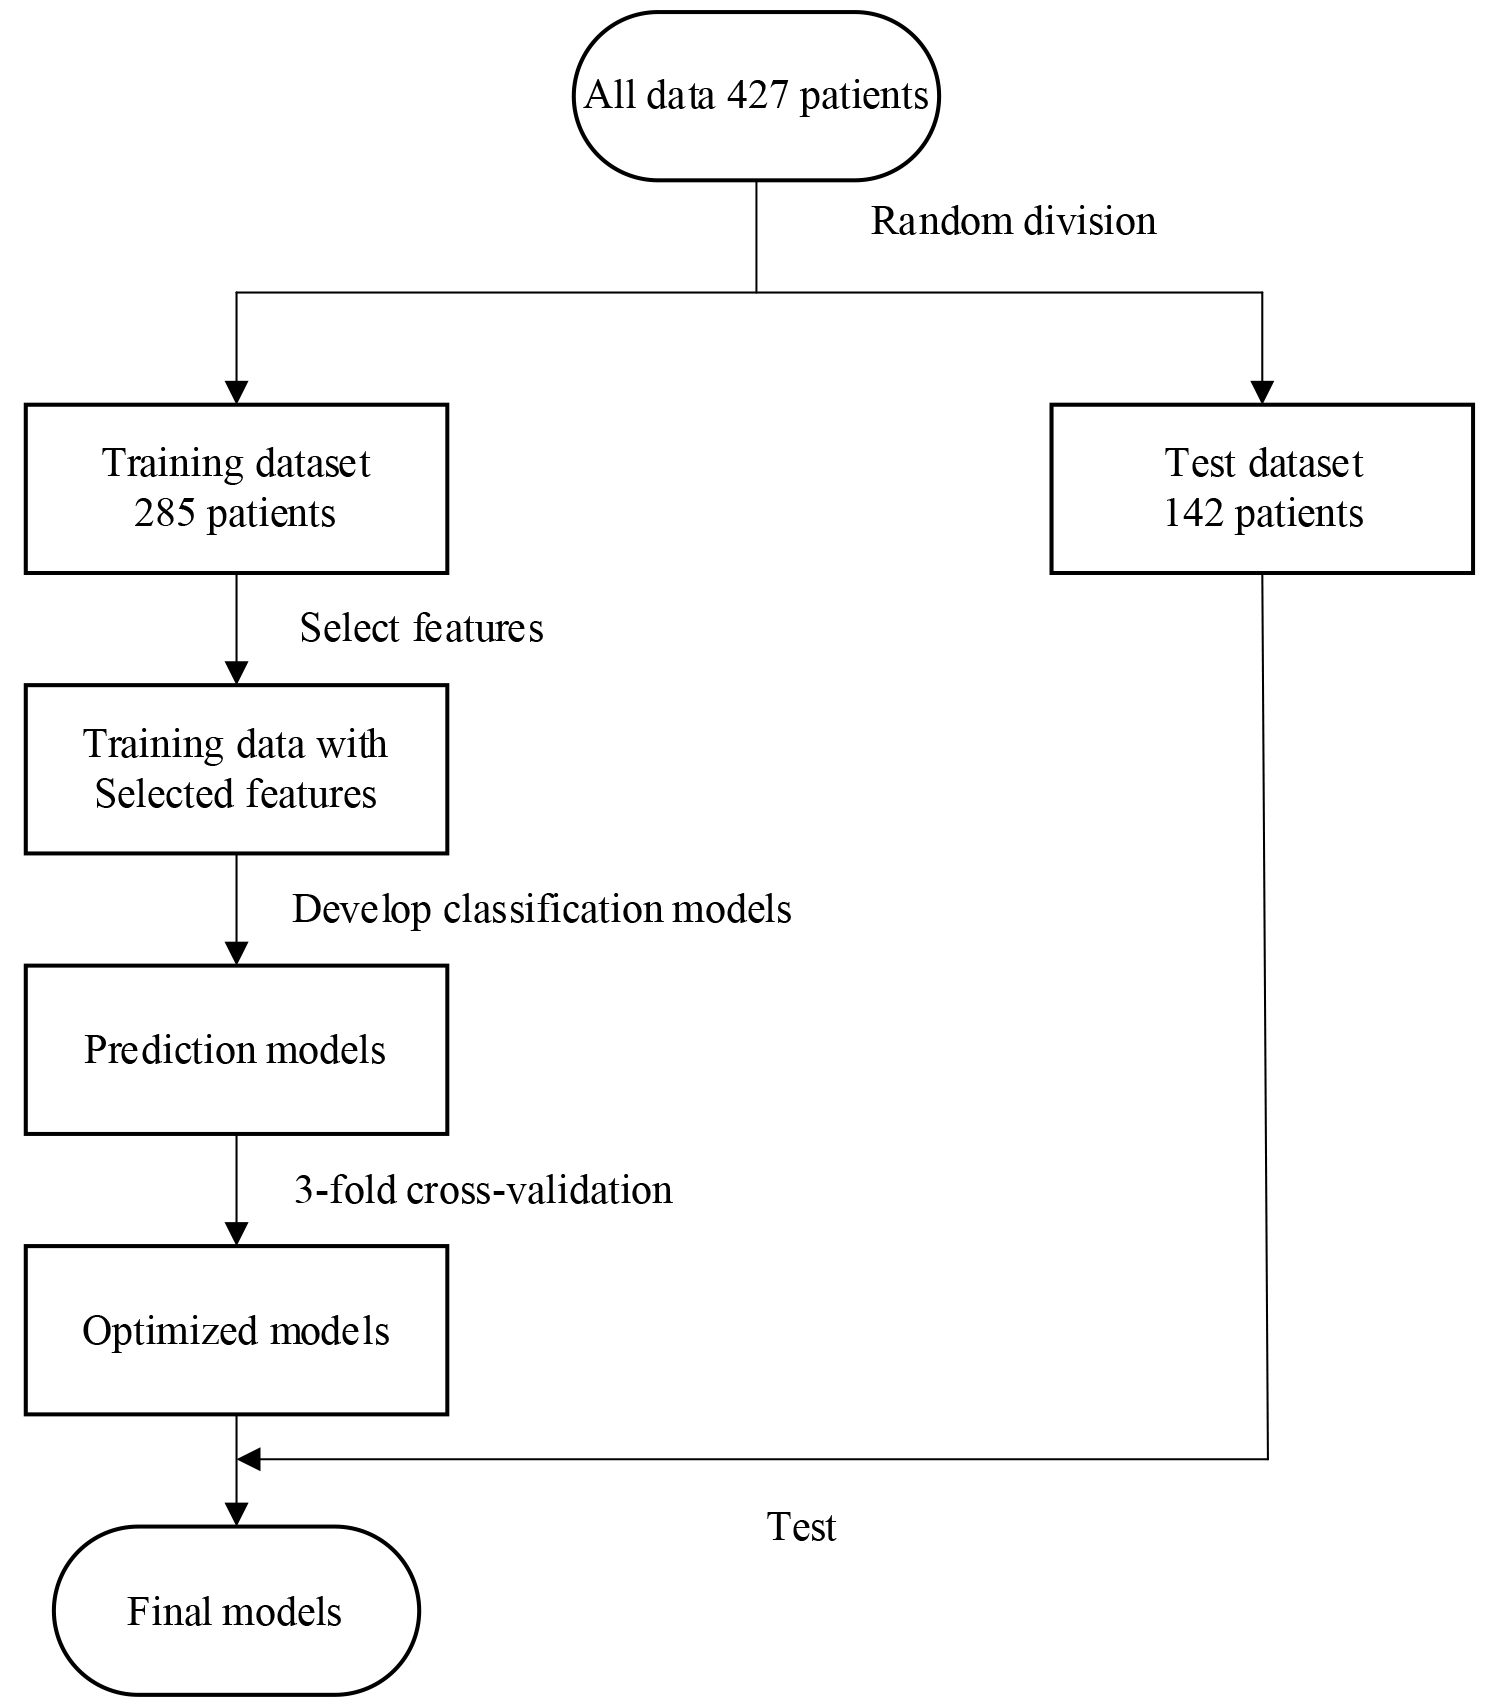 Overall training flowchart of the COVID-19 mild-severe disease prediction model.